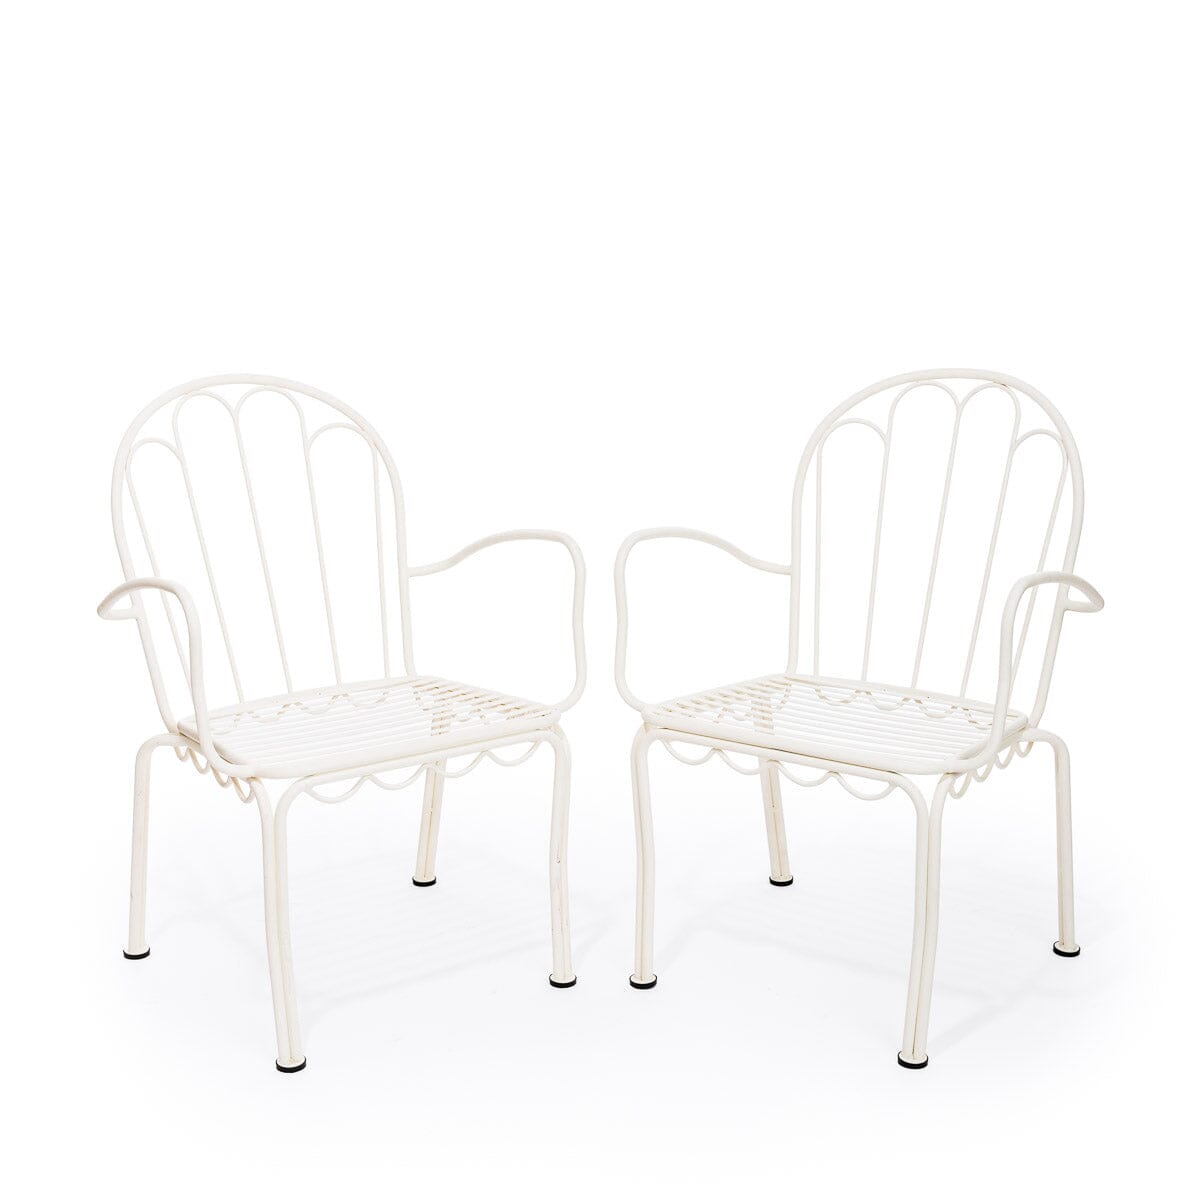 The Dining Chair Set - Antique White